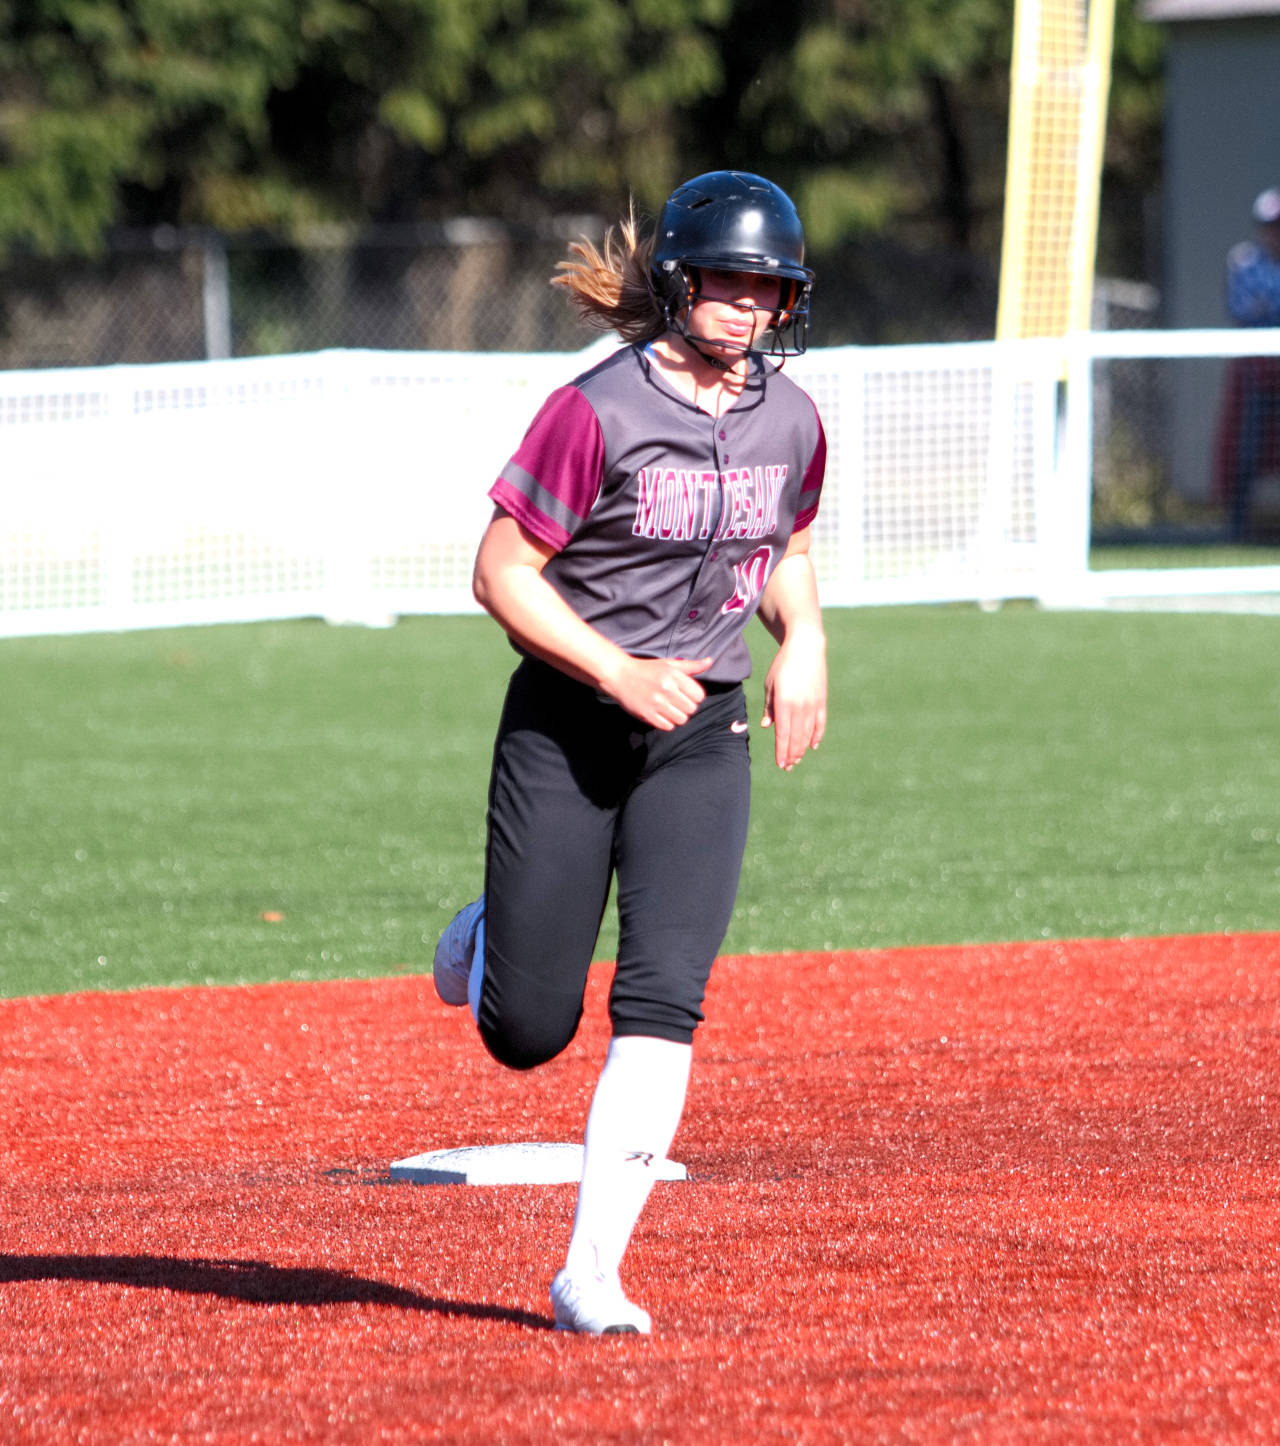 RYAN SPARKS | THE DAILY WORLD Montesano’s Jessica Stanfield was named the 1A Evergreen League MVP for the 2021 season after leading the Bulldogs to a district championship and breaking the school’s regular-season home run record.